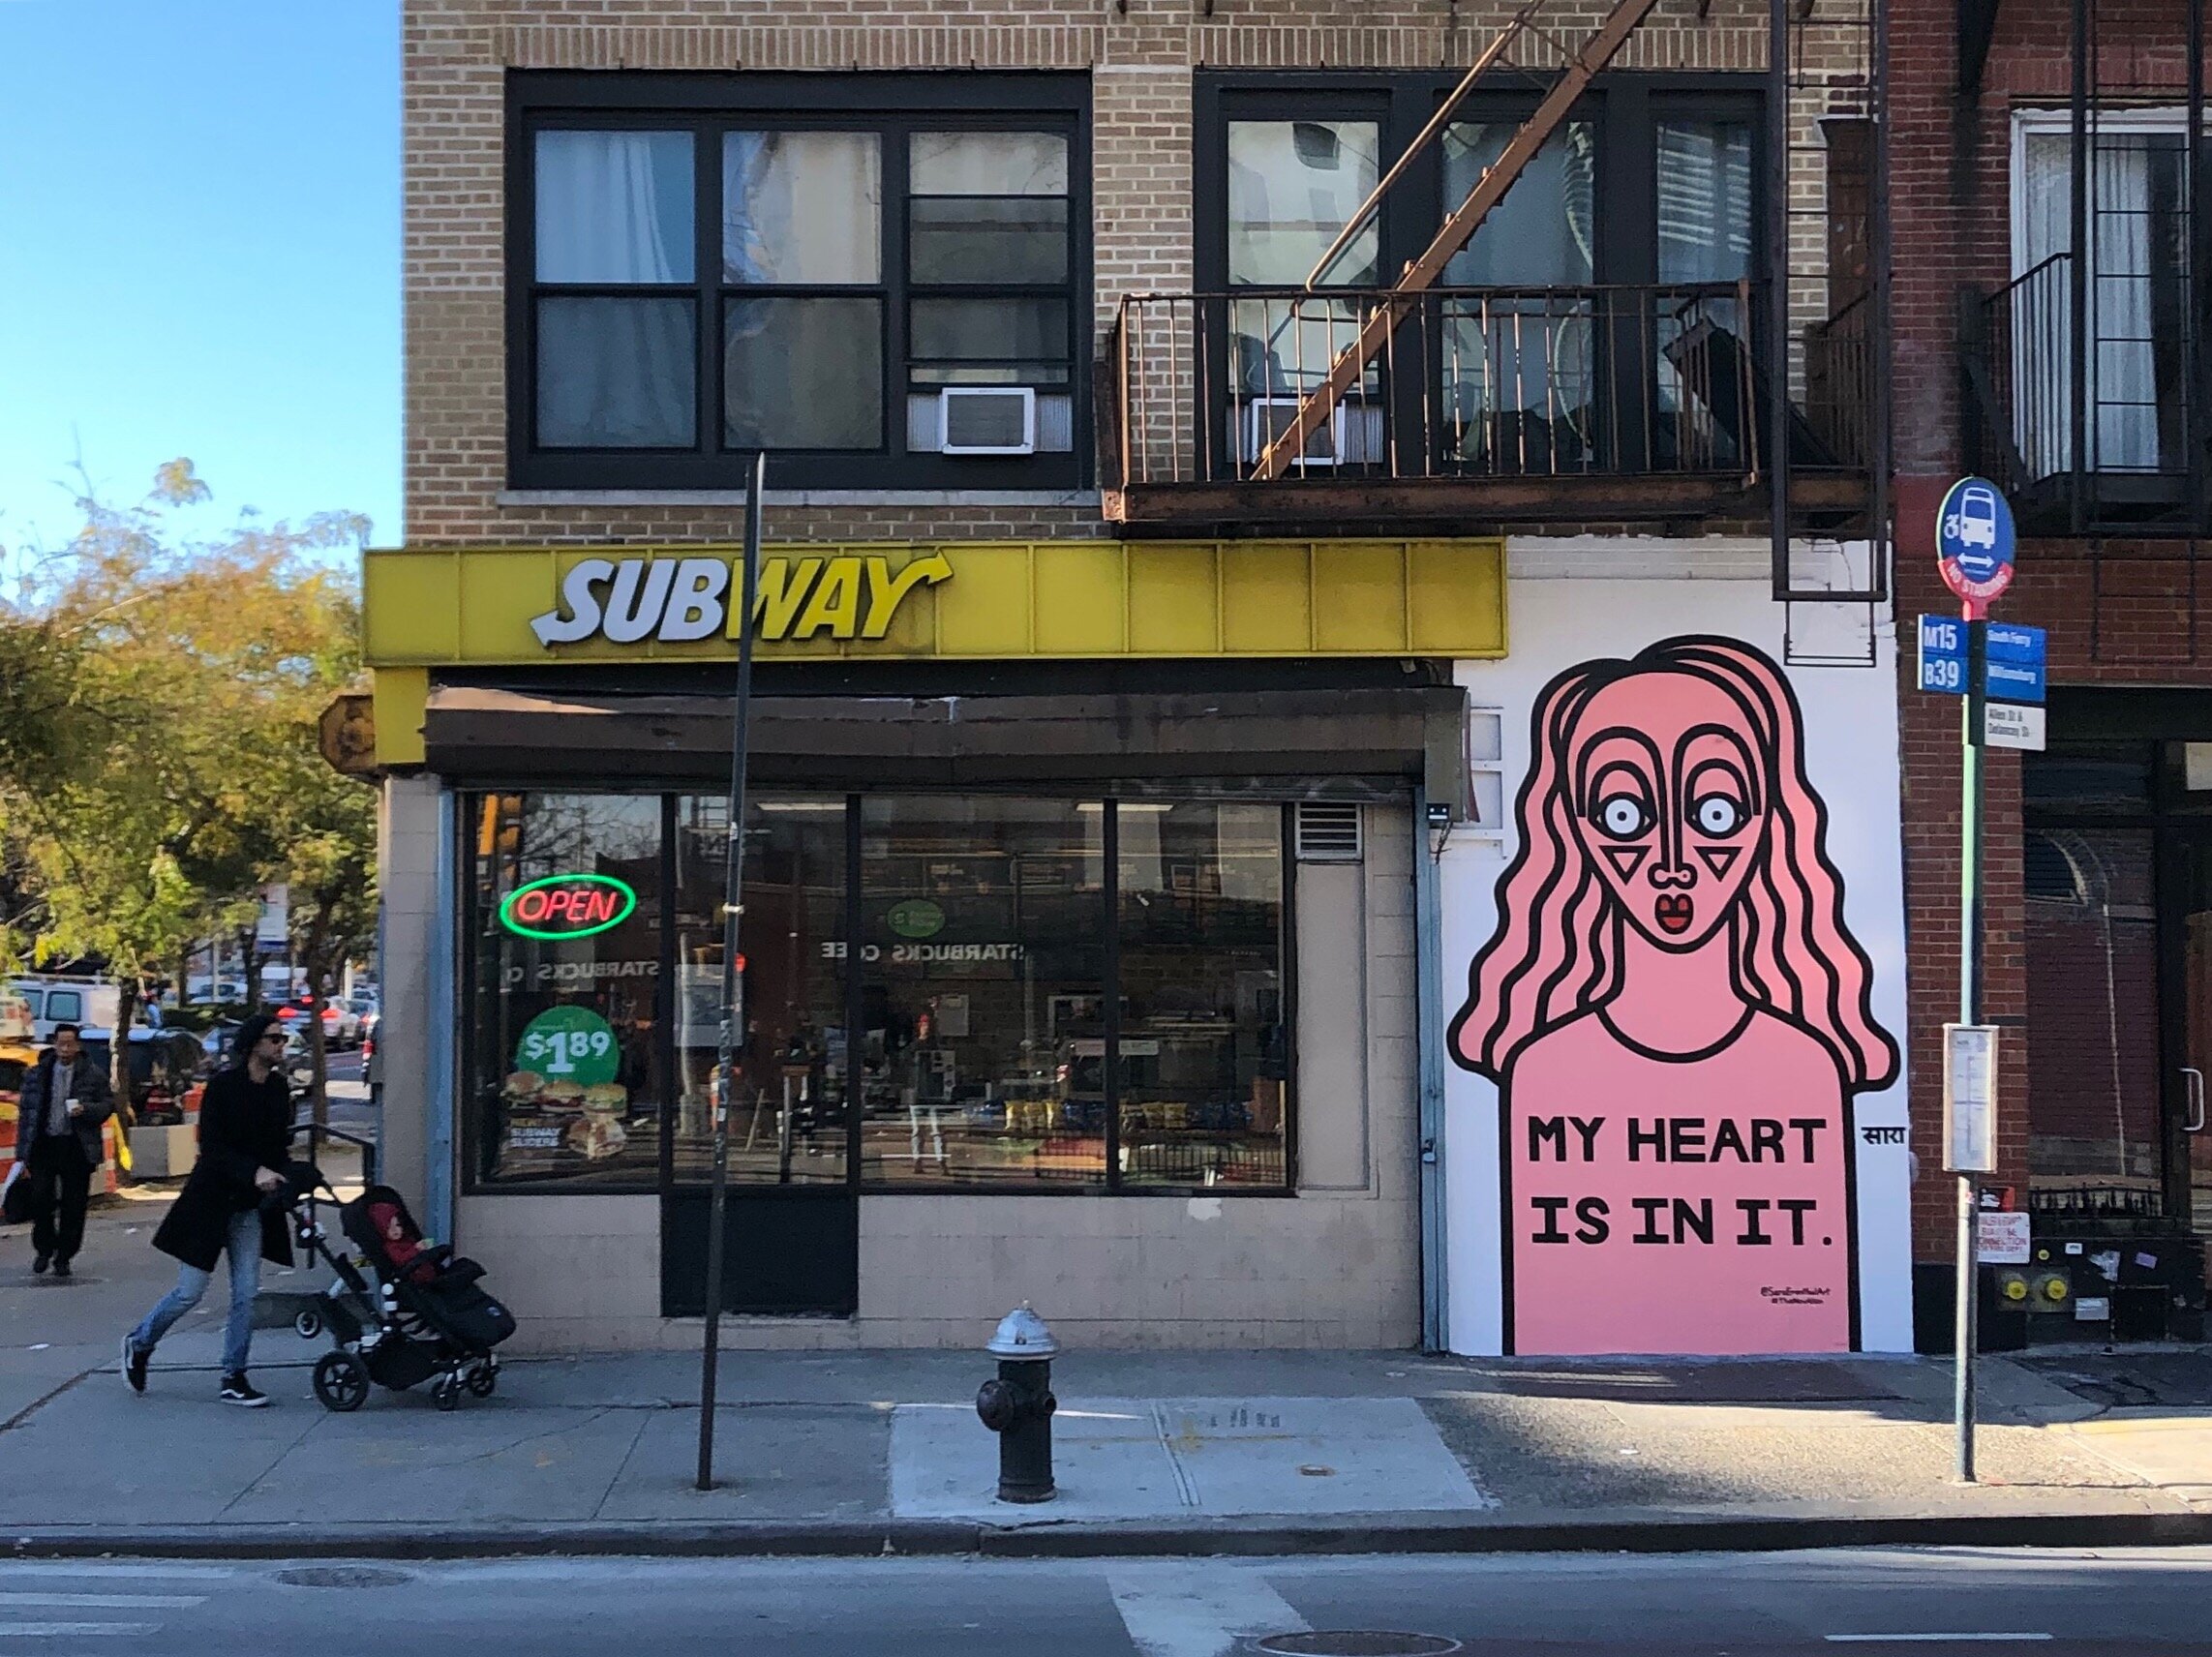  Mural at Allen/Delancey in The Lower East Side, NY  2019 